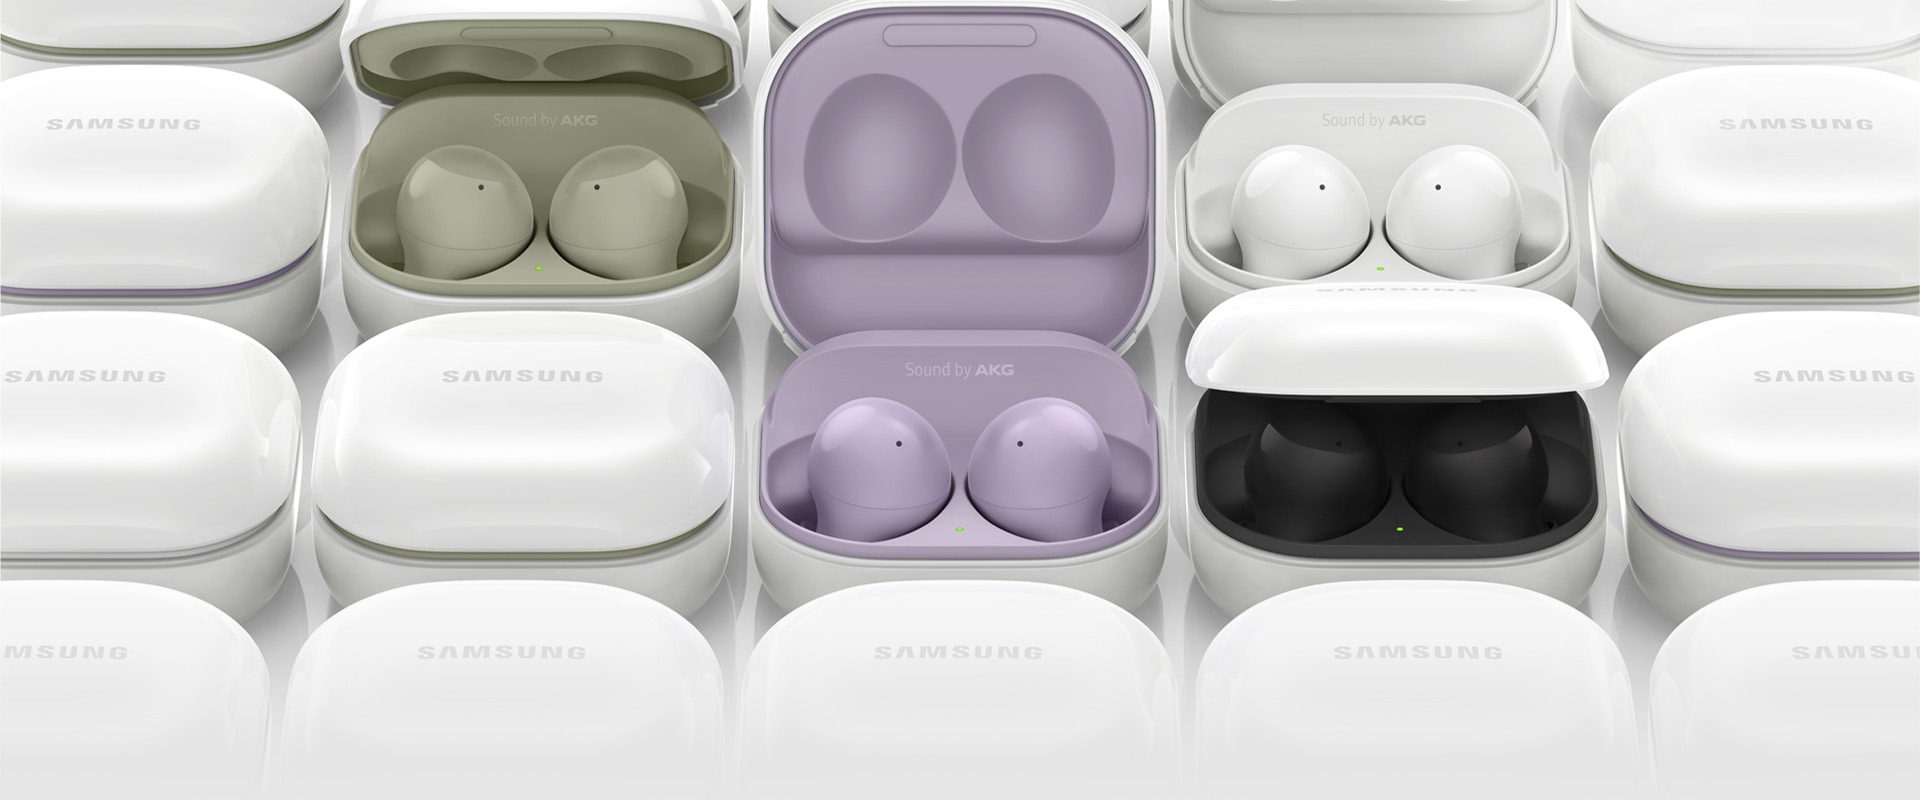 Galaxy Buds2 cases are placed next to each other. Several of the cases are opened, each showing different colours of the inside case, from olive green, lavender, white, to black.